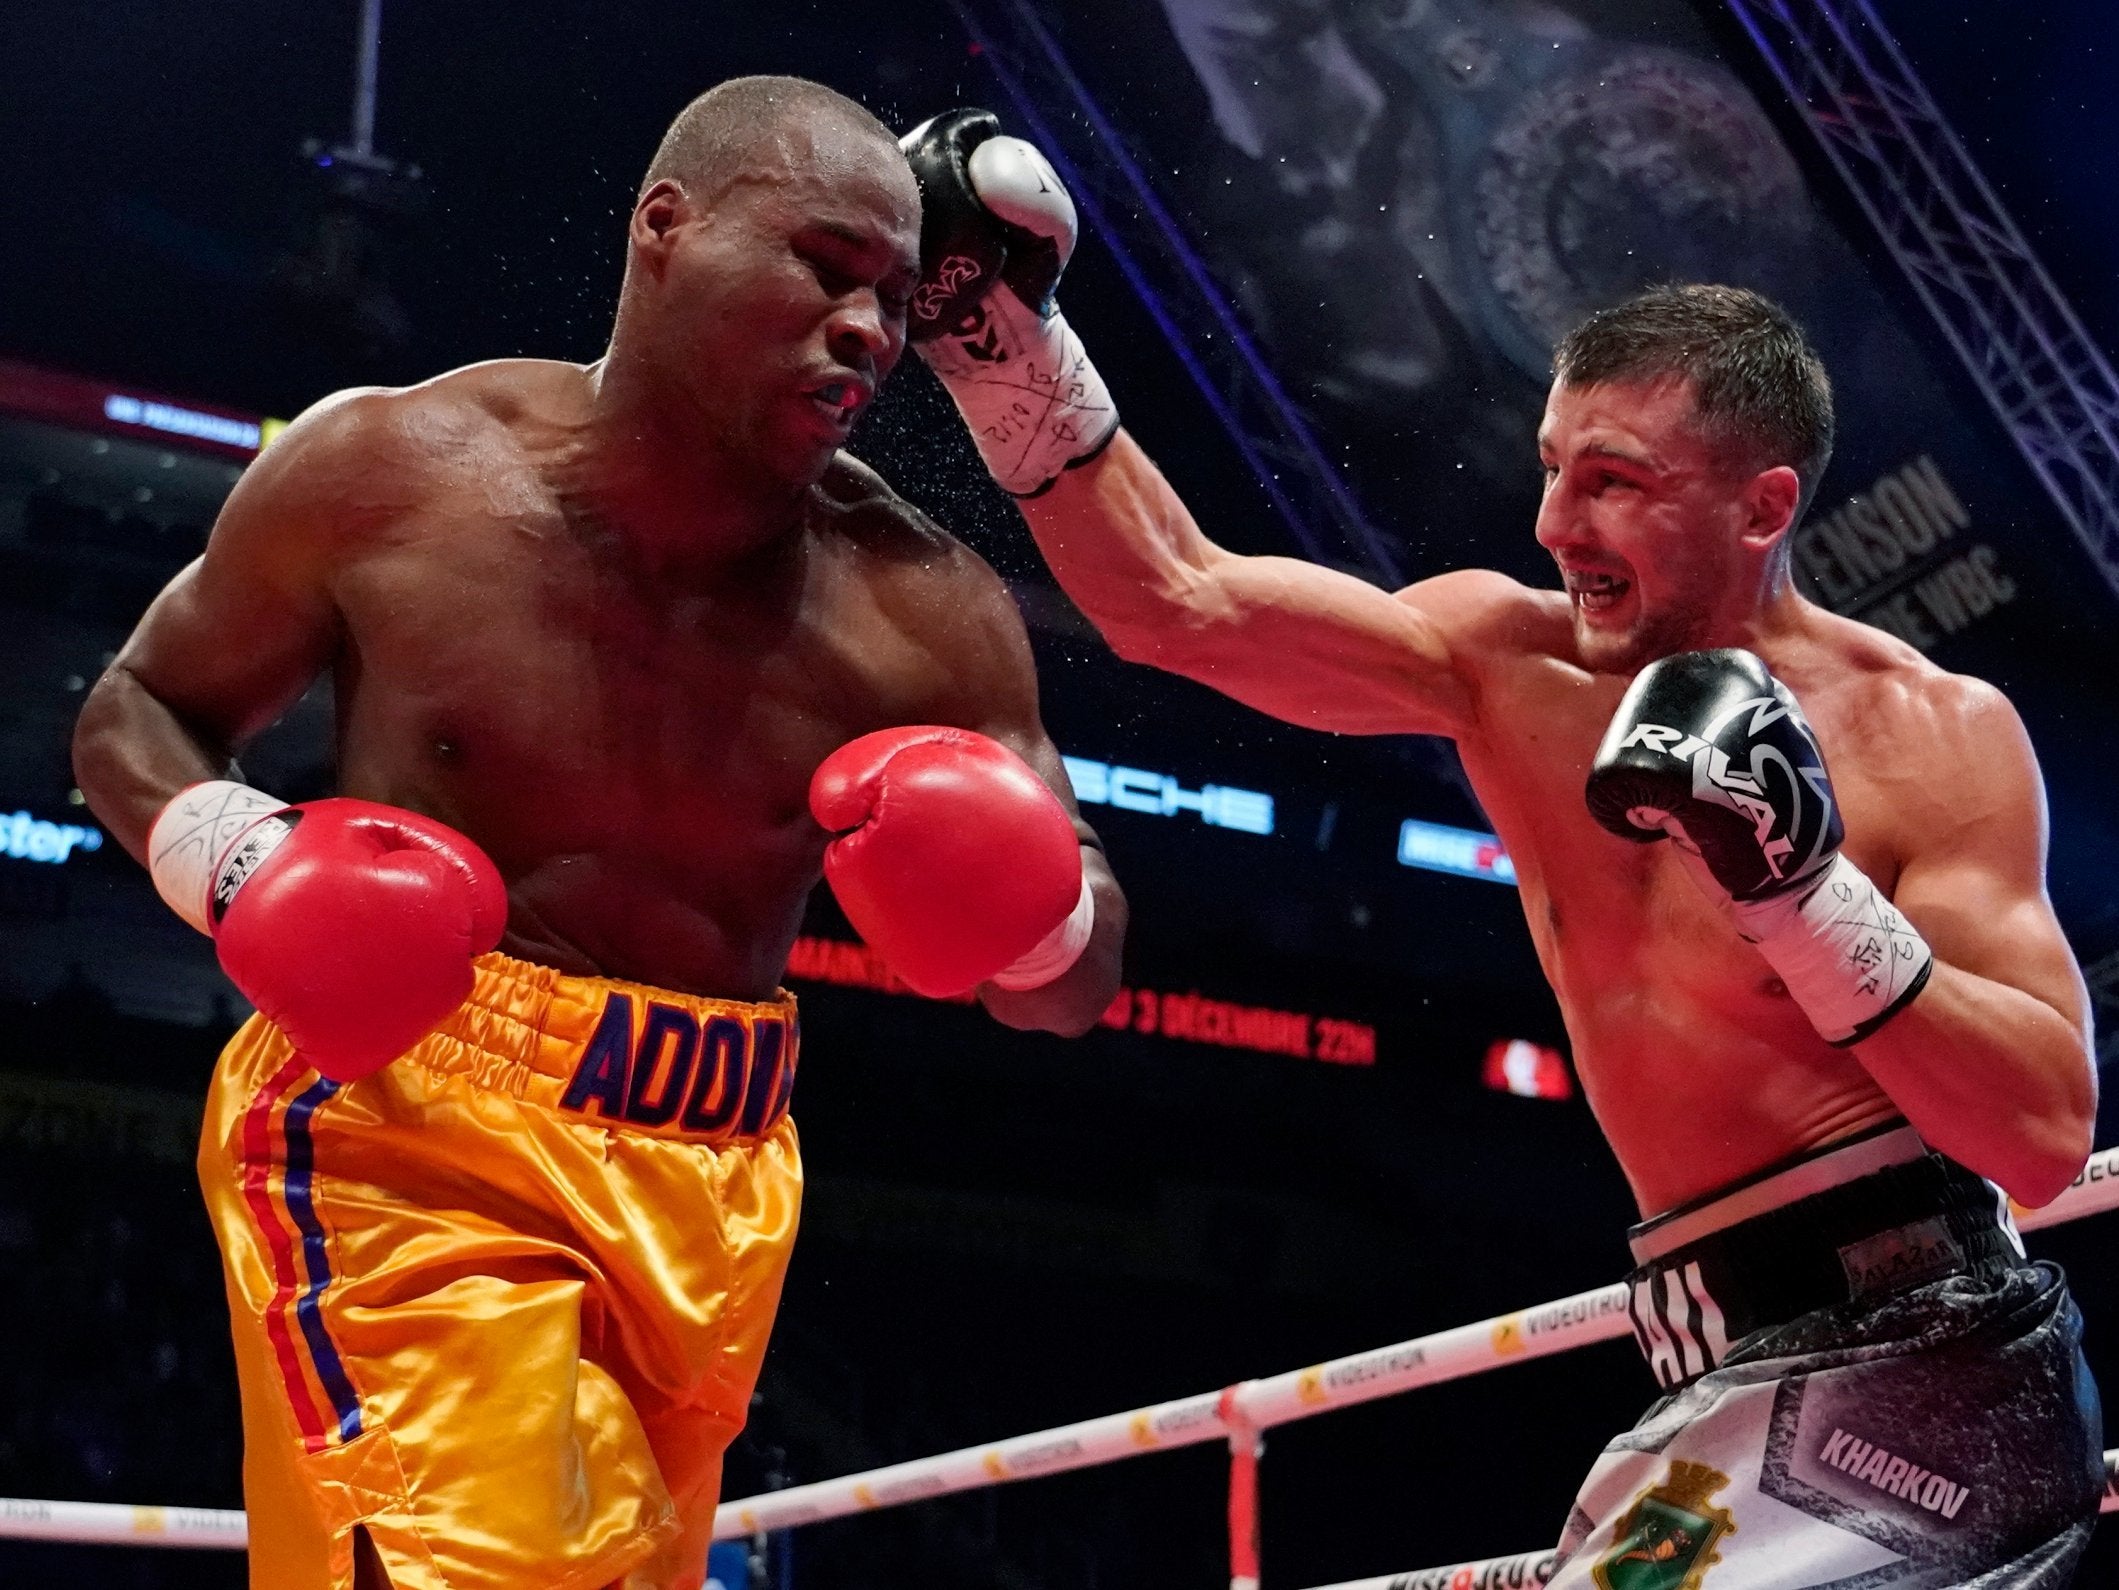 Adonis Stevenson (left) is awake and out of his three-week coma, according to his girlfriend